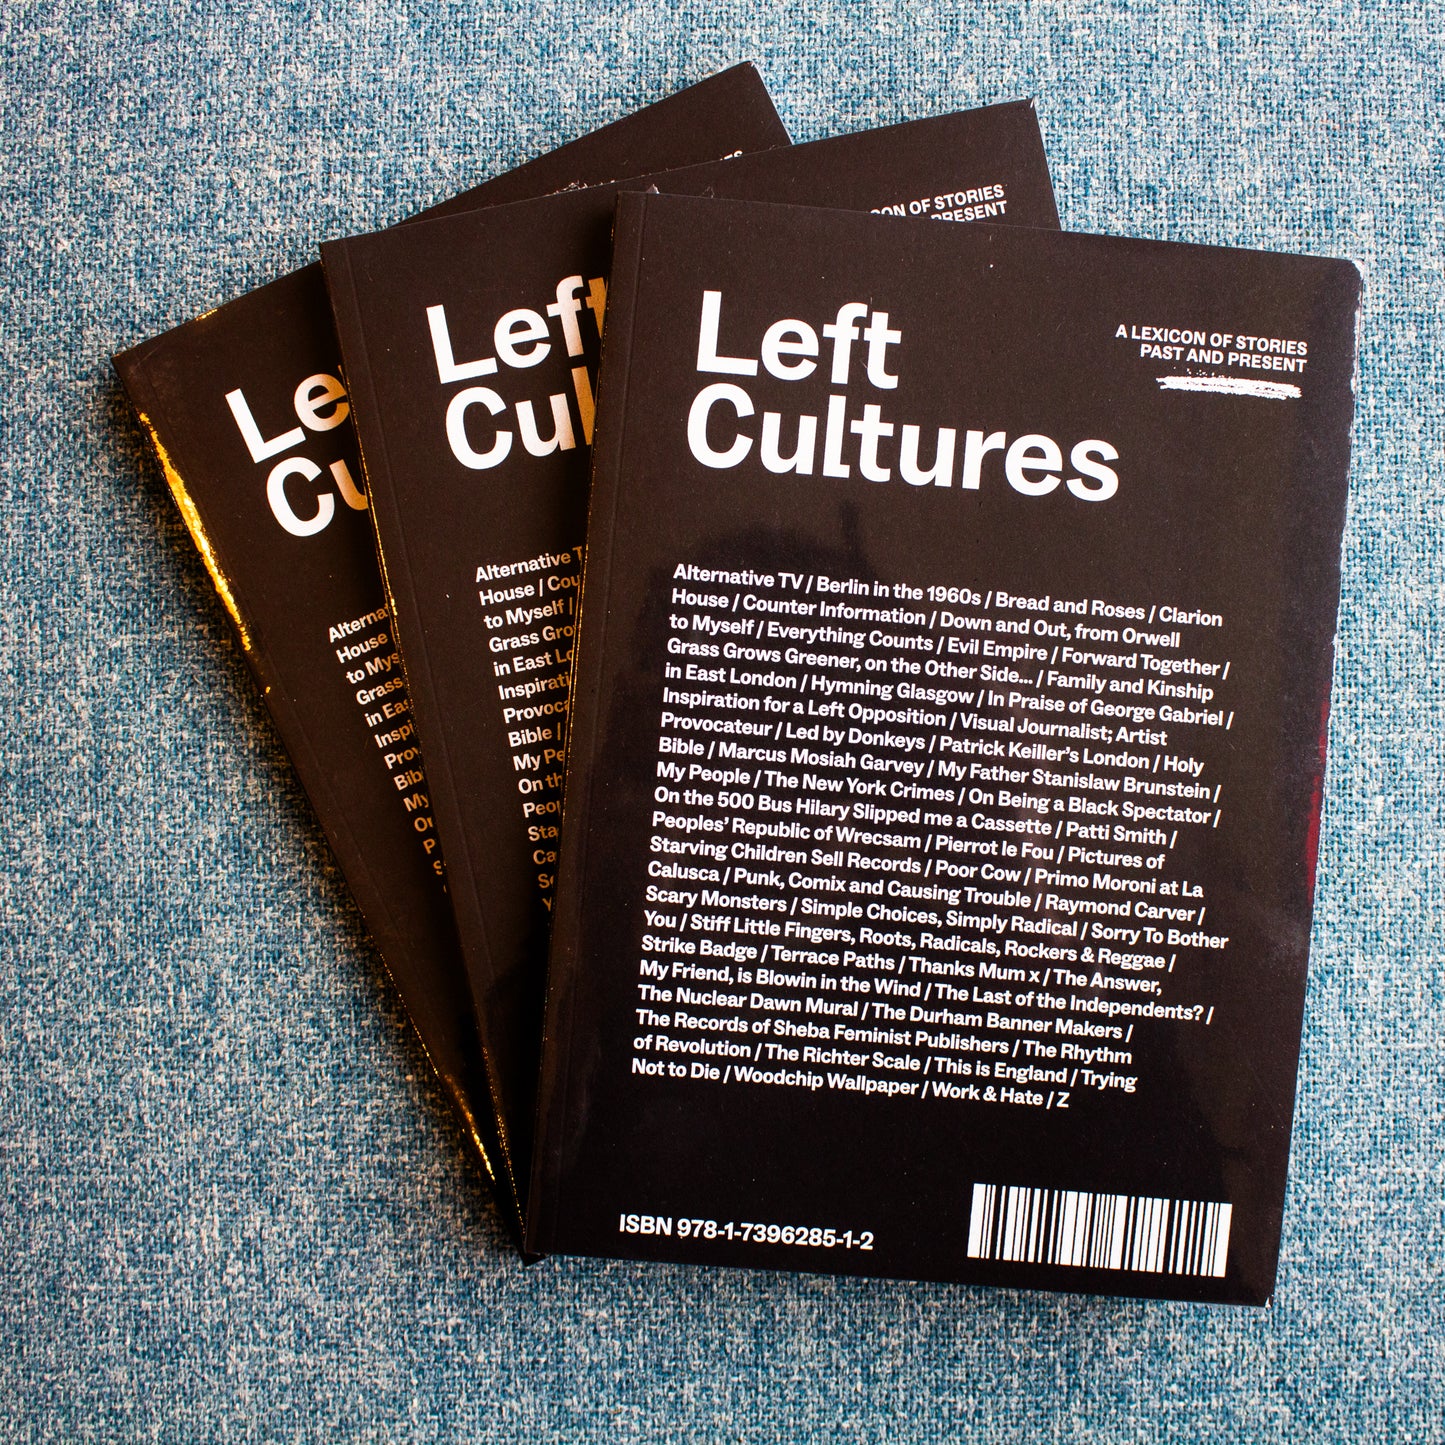 Left Cultures (Issue 2)